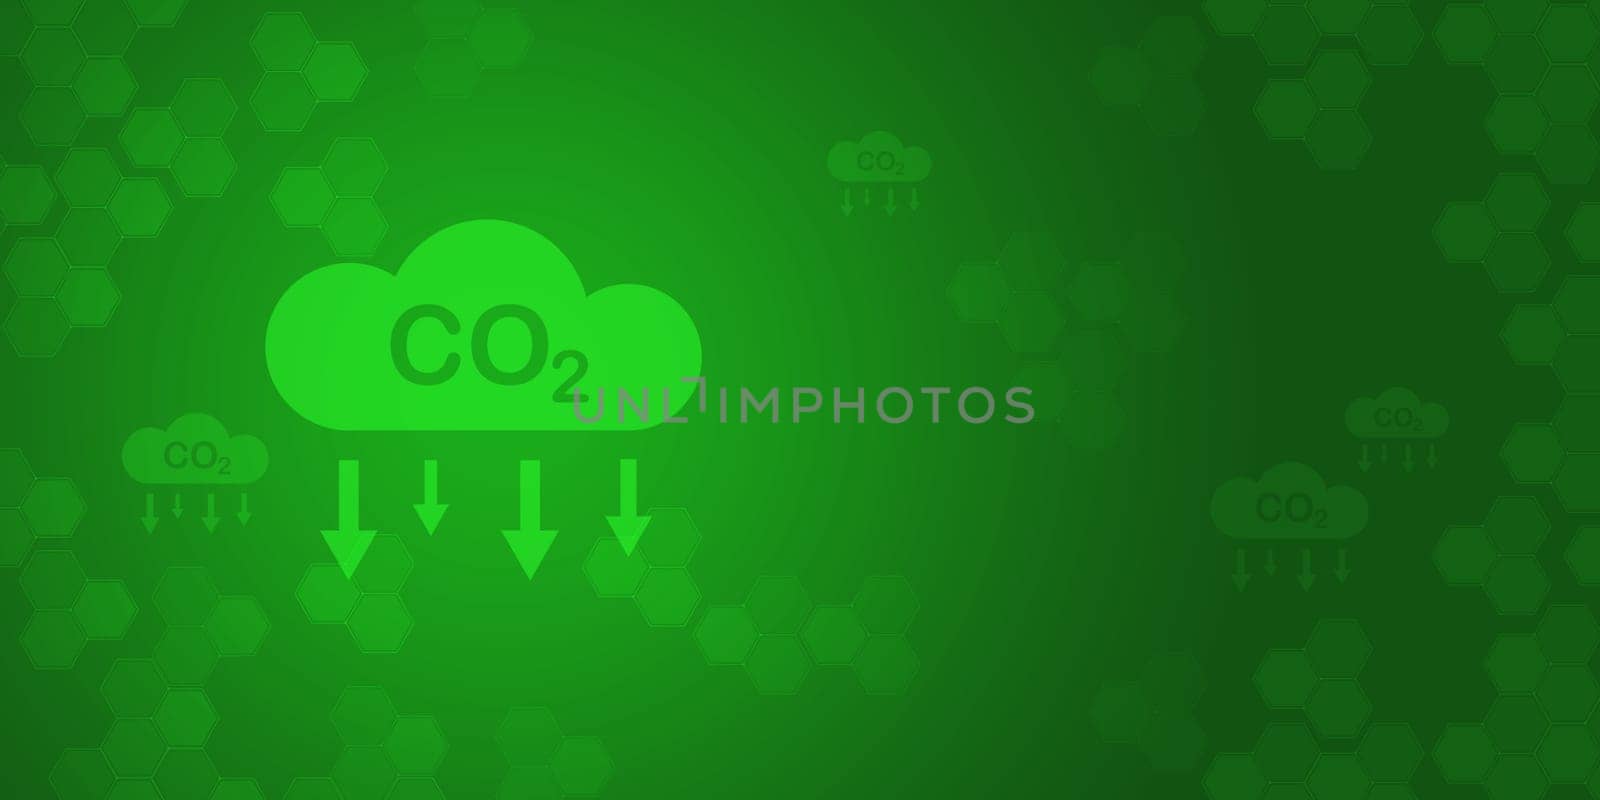 Reduce CO2 emissions to limit climate change and global warming, Low greenhouse gas levels, decarbonize, net zero carbon dioxide footprint, abstract green background.